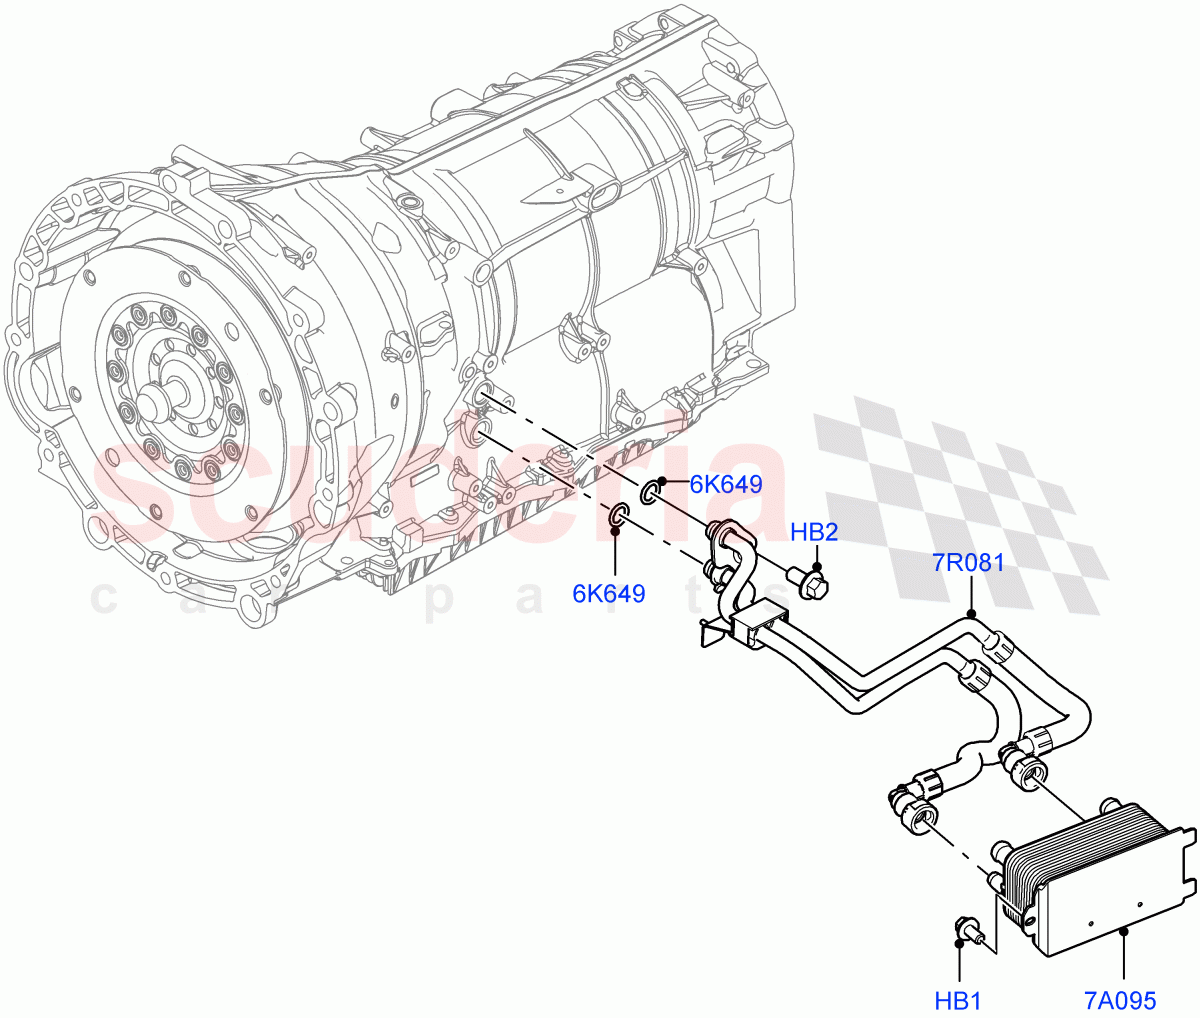 Transmission Cooling Systems(Nitra Plant Build)(3.0L AJ20P6 Petrol High,8 Speed Auto Trans ZF 8HP76,3.0L AJ20D6 Diesel High) of Land Rover Land Rover Discovery 5 (2017+) [3.0 I6 Turbo Diesel AJ20D6]